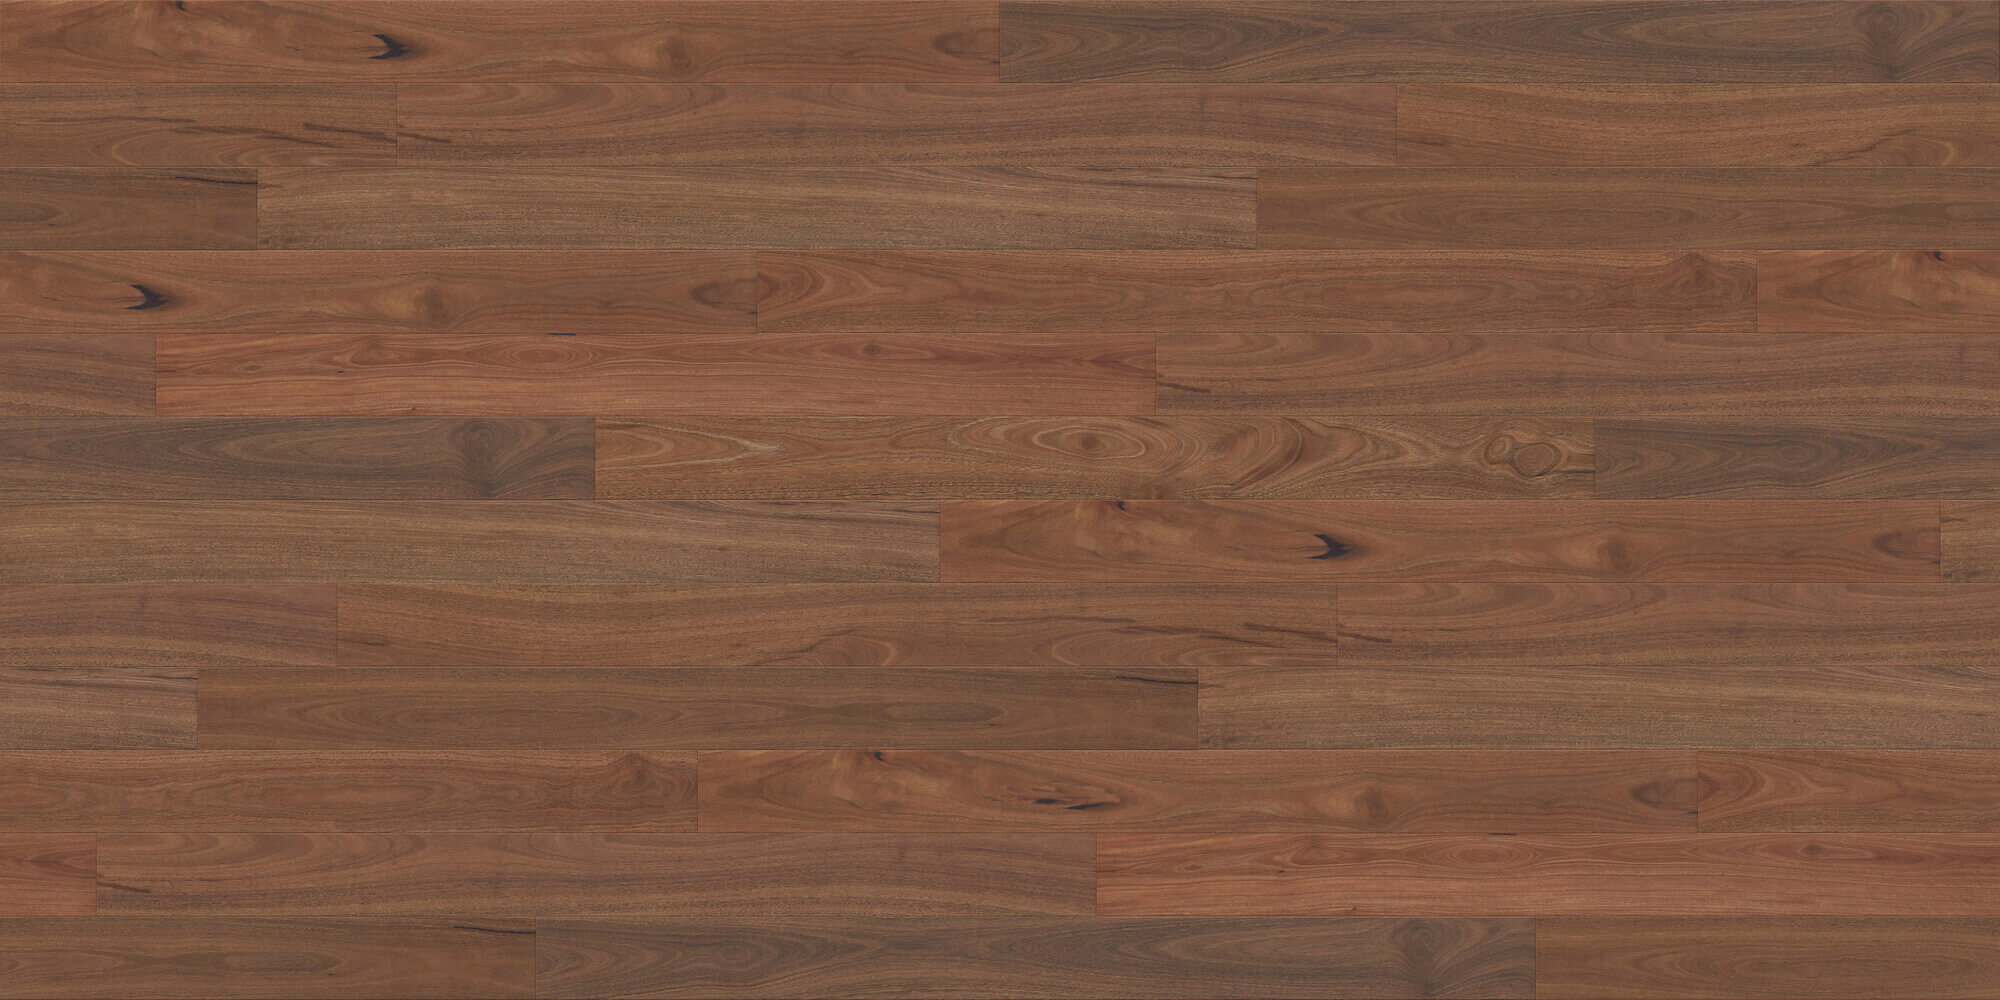 Empire OZ Engineered Timber Spotted Gum